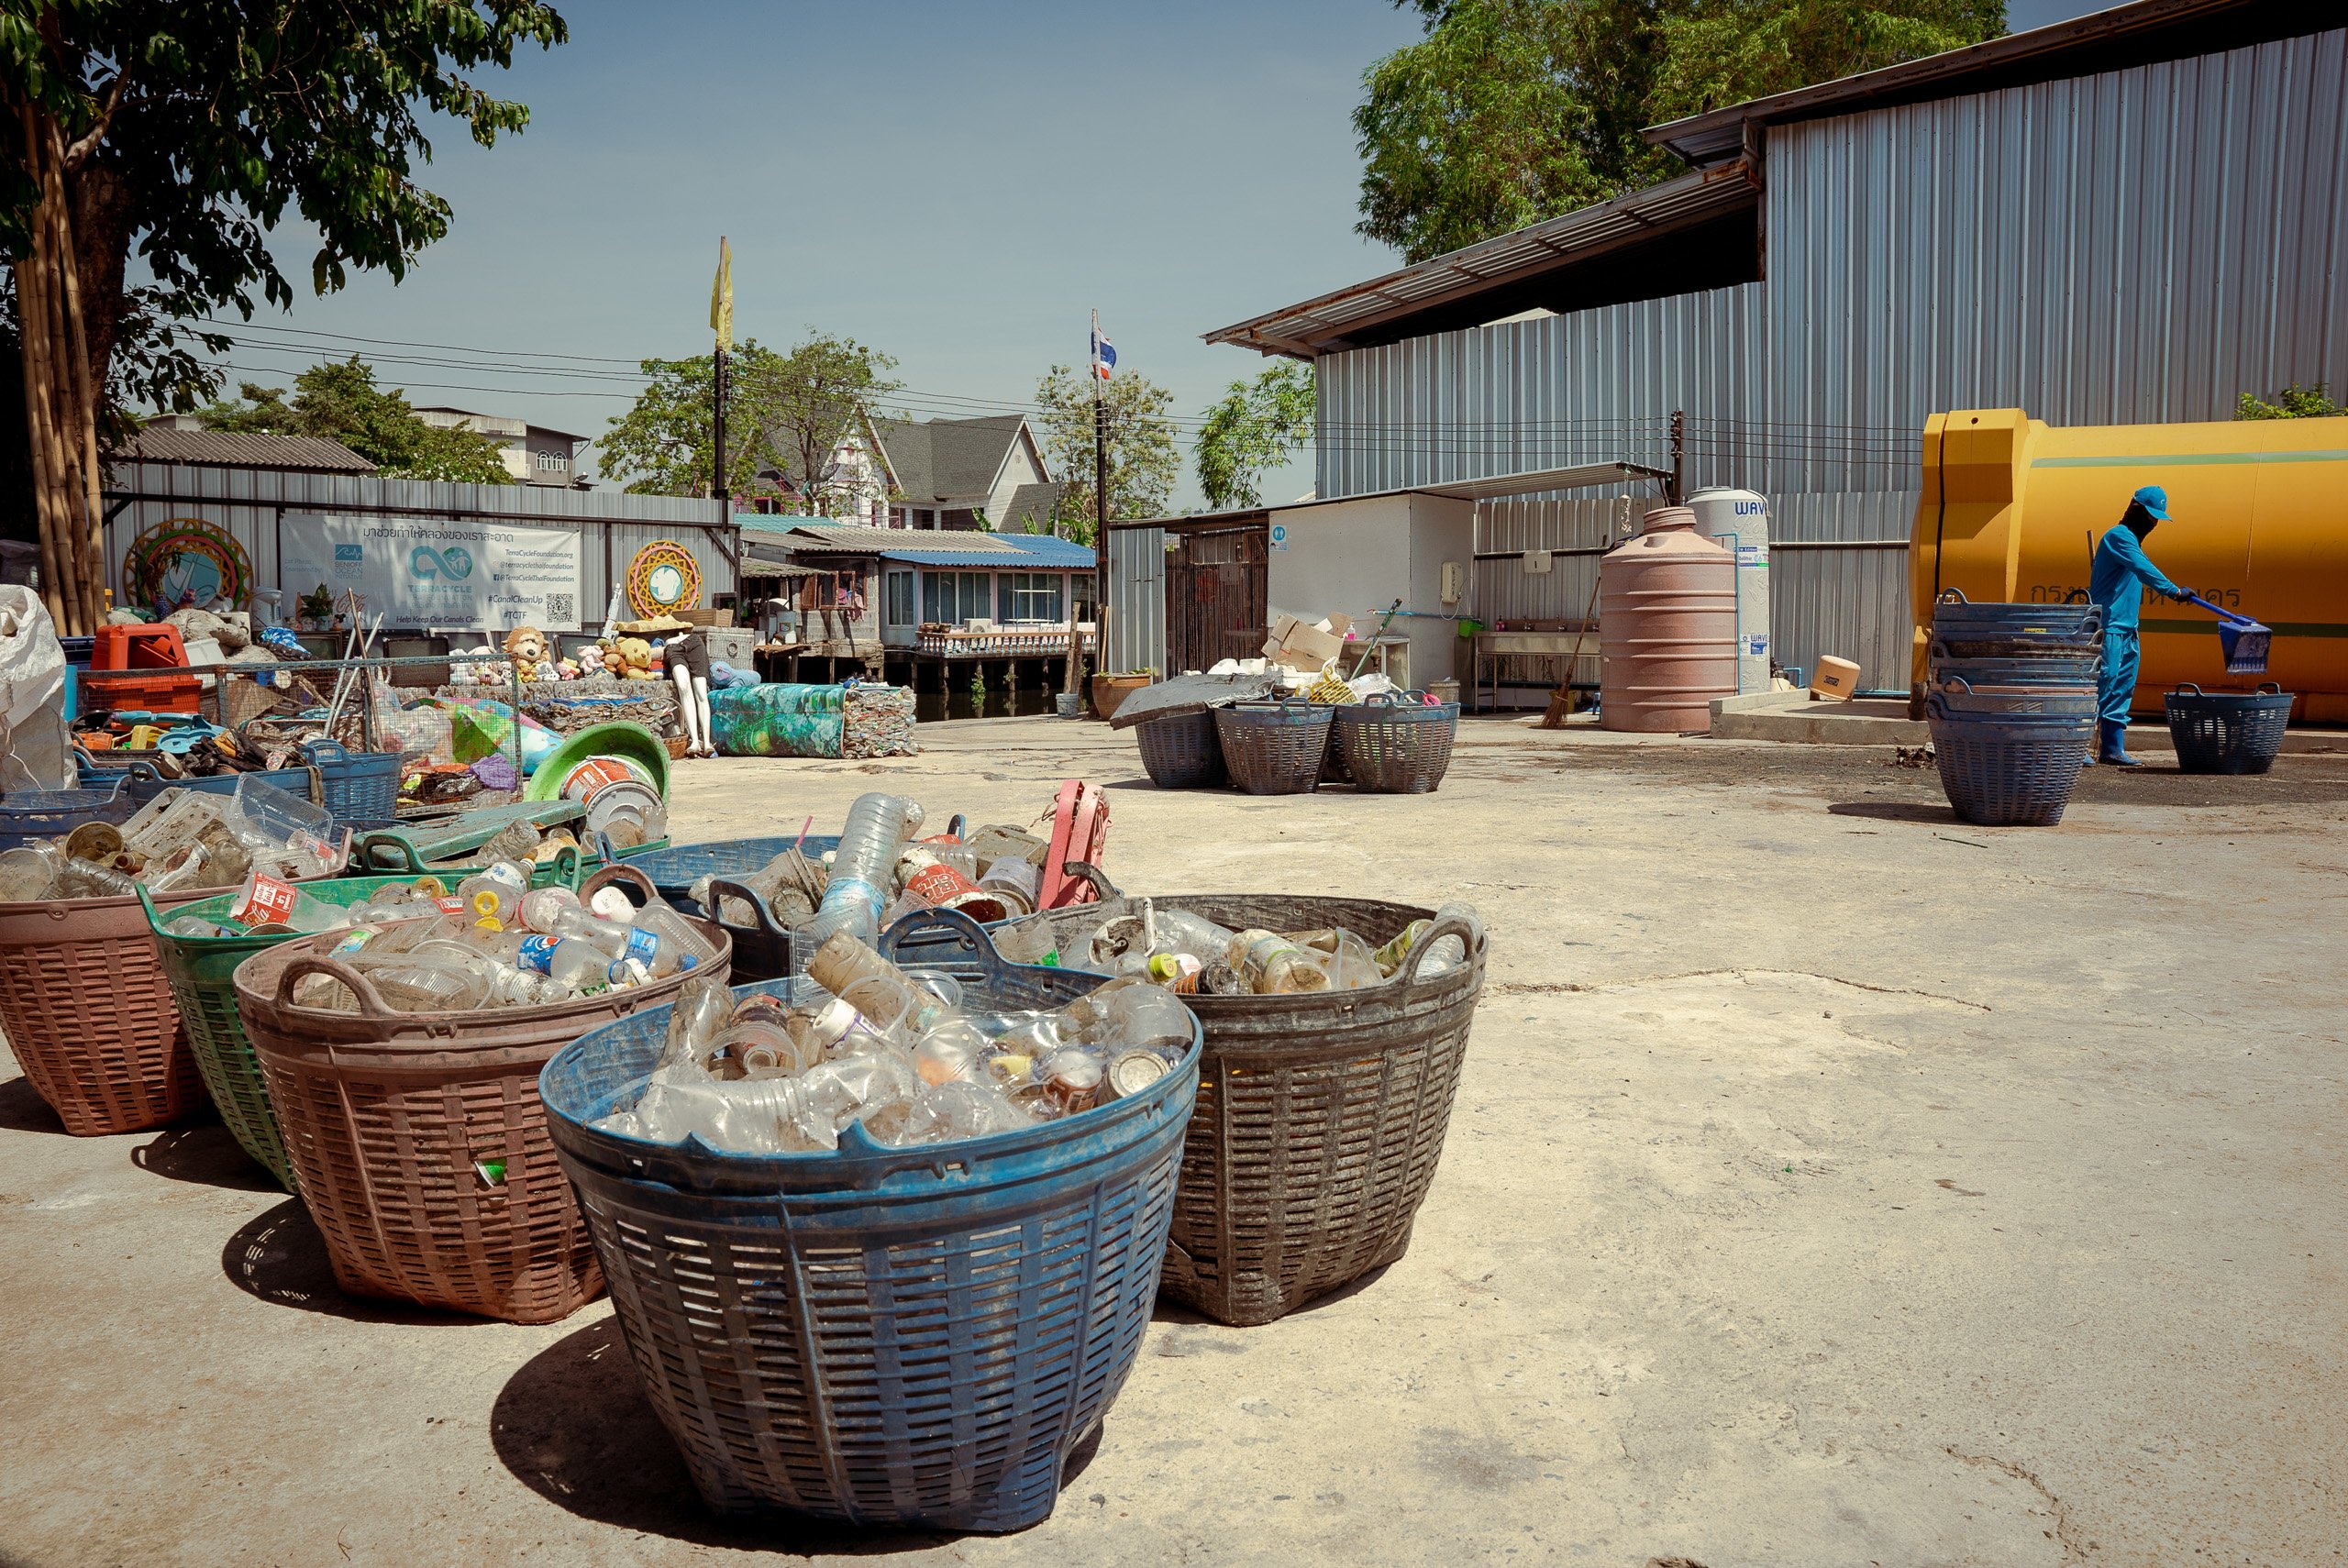 baskets of waste on convrete